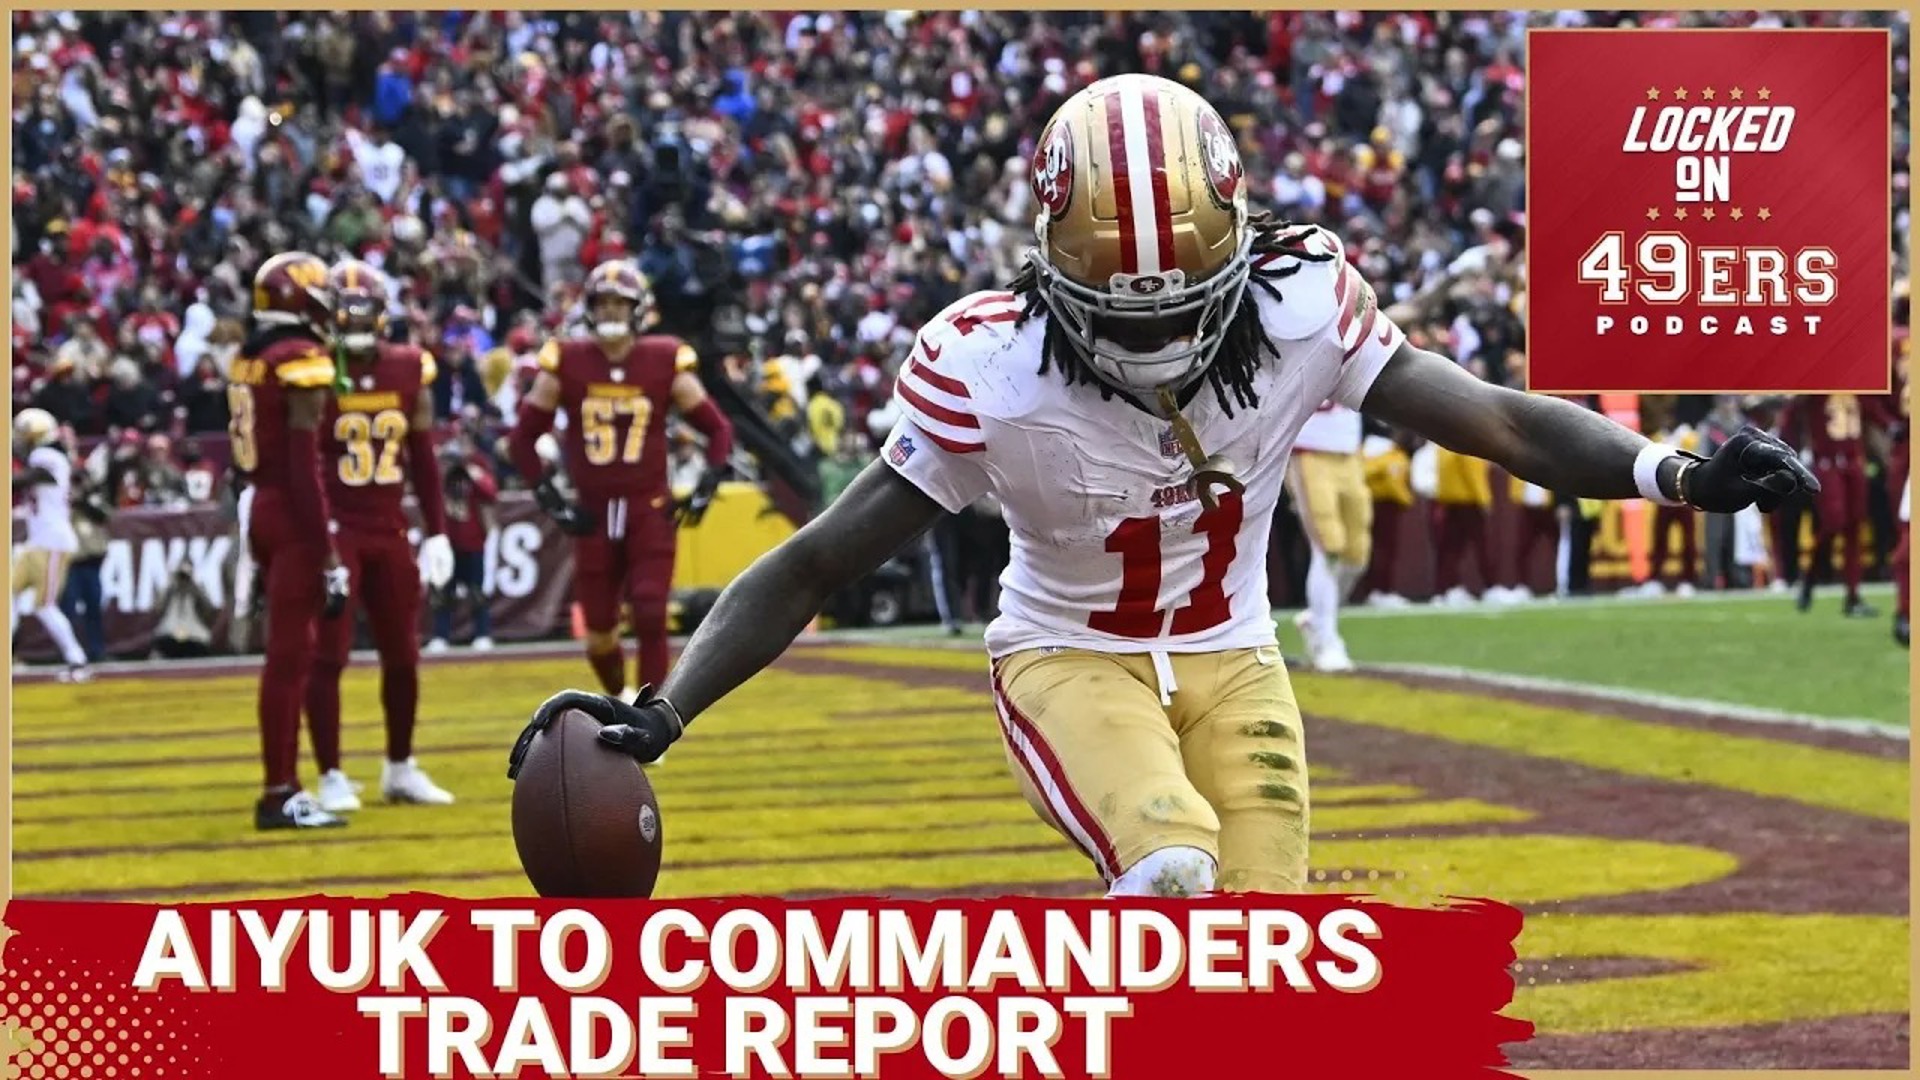 Brandon Aiyuk responds on social media to a report of past trade talks between the San Francisco 49ers and Washington Commanders.